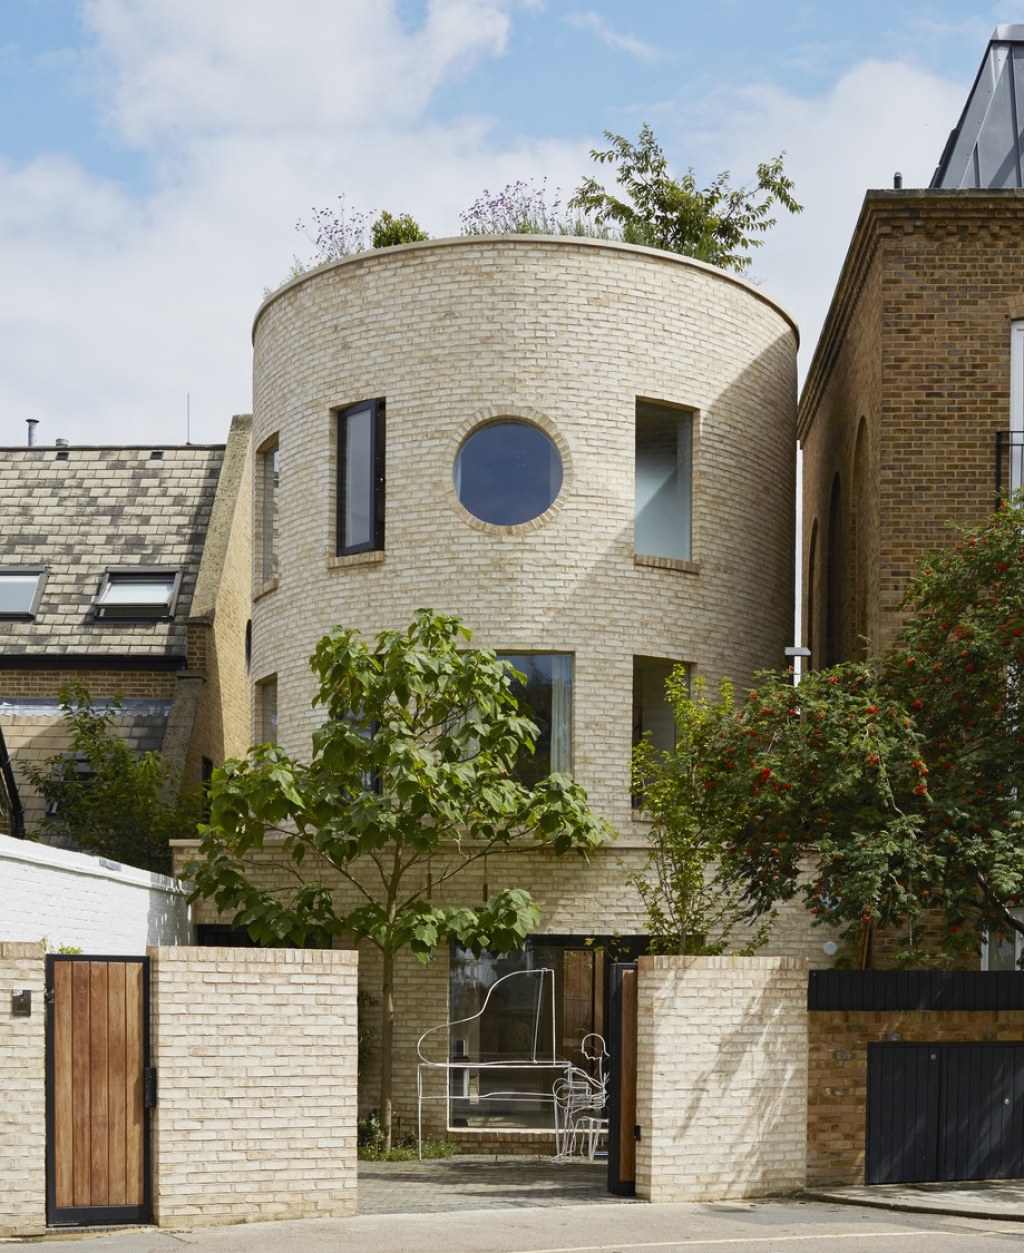 The Round House / Front facade